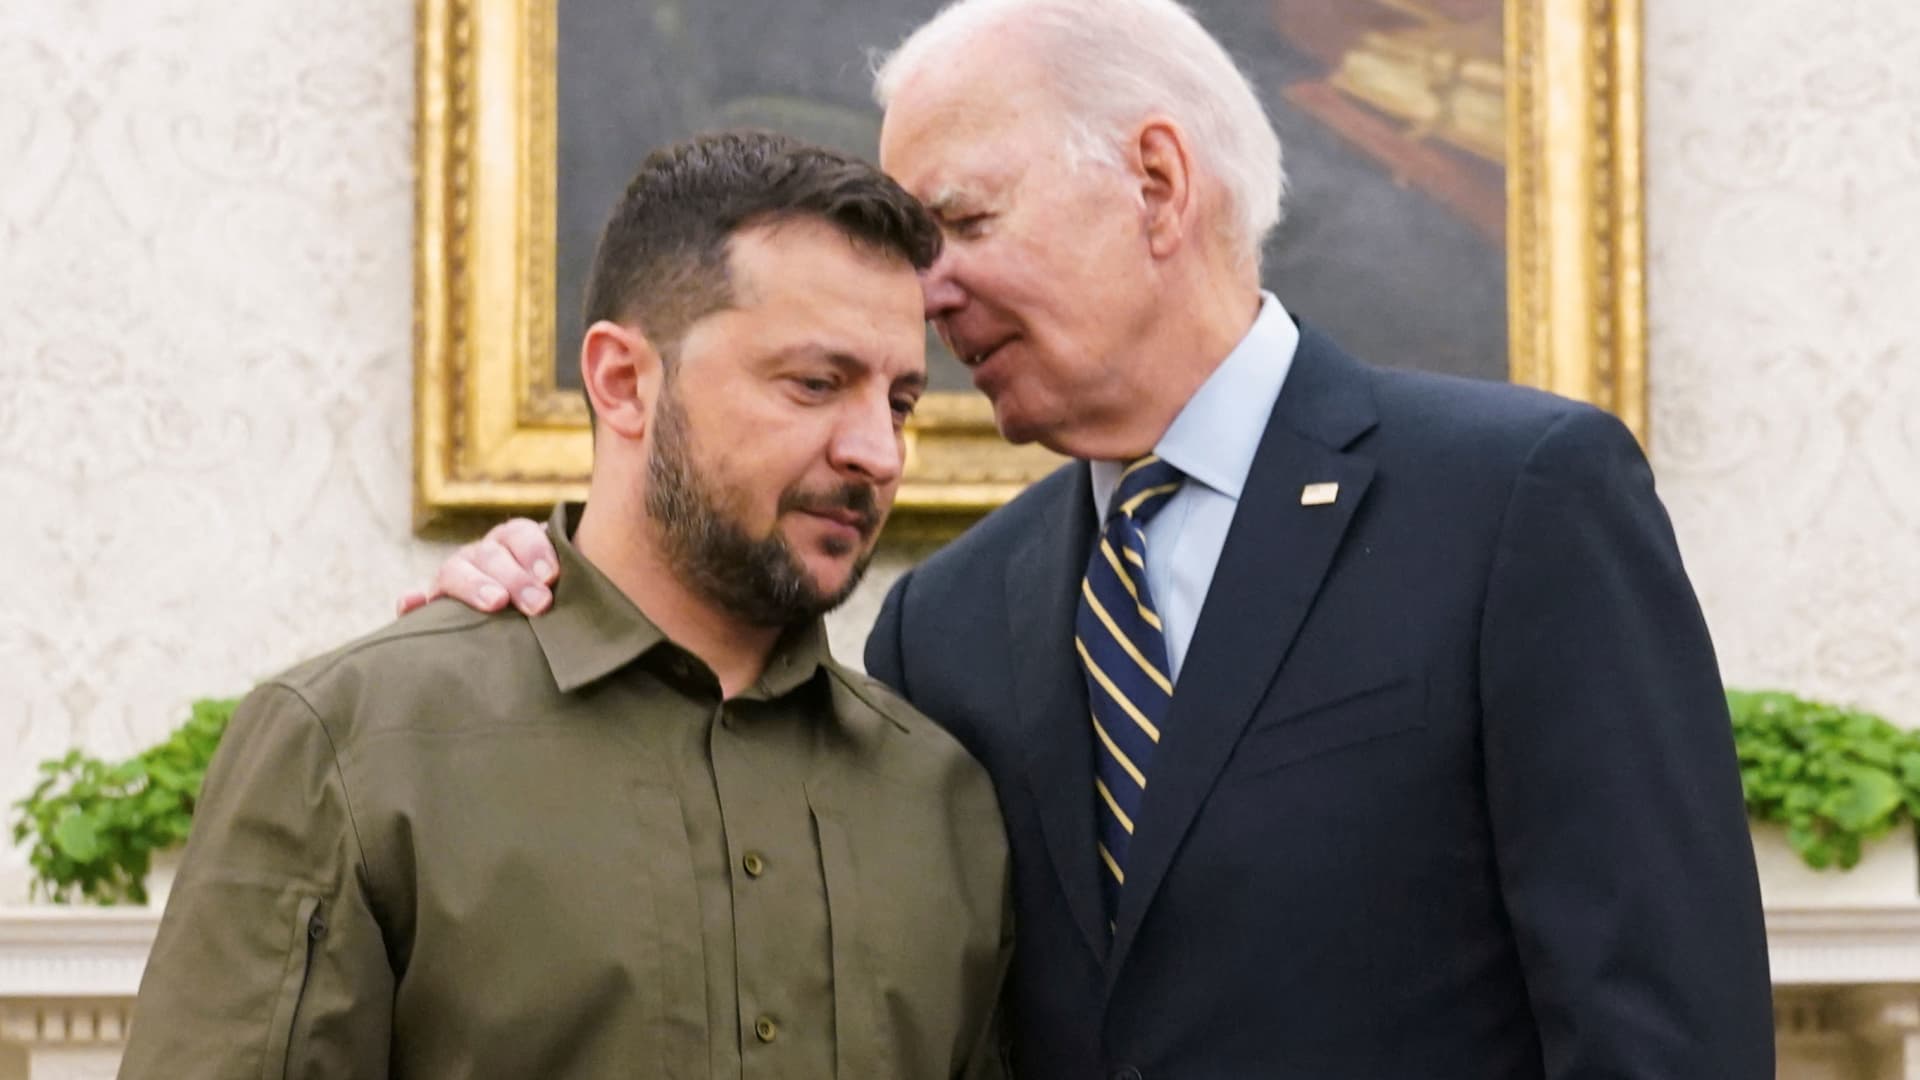 U.S. President Joe Biden puts his arm around Ukrainian President Volodymyr Zelenskyy and whispers to him as they meet in the Oval Office of the White House in Washington, September 21, 2023.